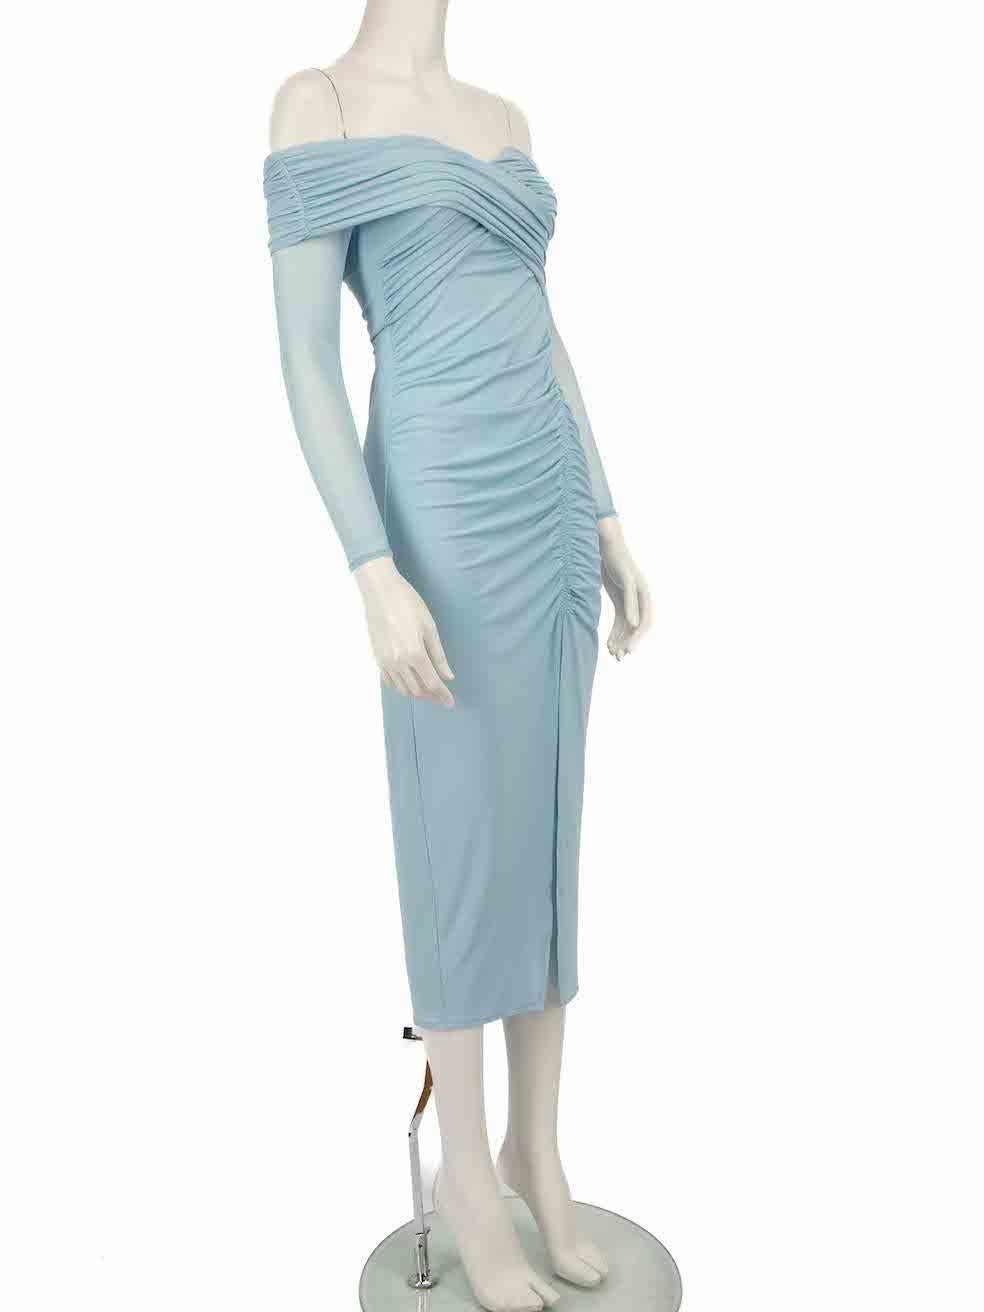 CONDITION is Never worn, with tags. No visible wear to dress is evident on this new Self-Portrait designer resale item.
 
 
 
 Details
 
 
 Blue
 
 Viscose
 
 Bodycon dress
 
 V-neck
 
 Long sleeves
 
 Midi
 
 Ruched
 
 Back zip and hook fastening
